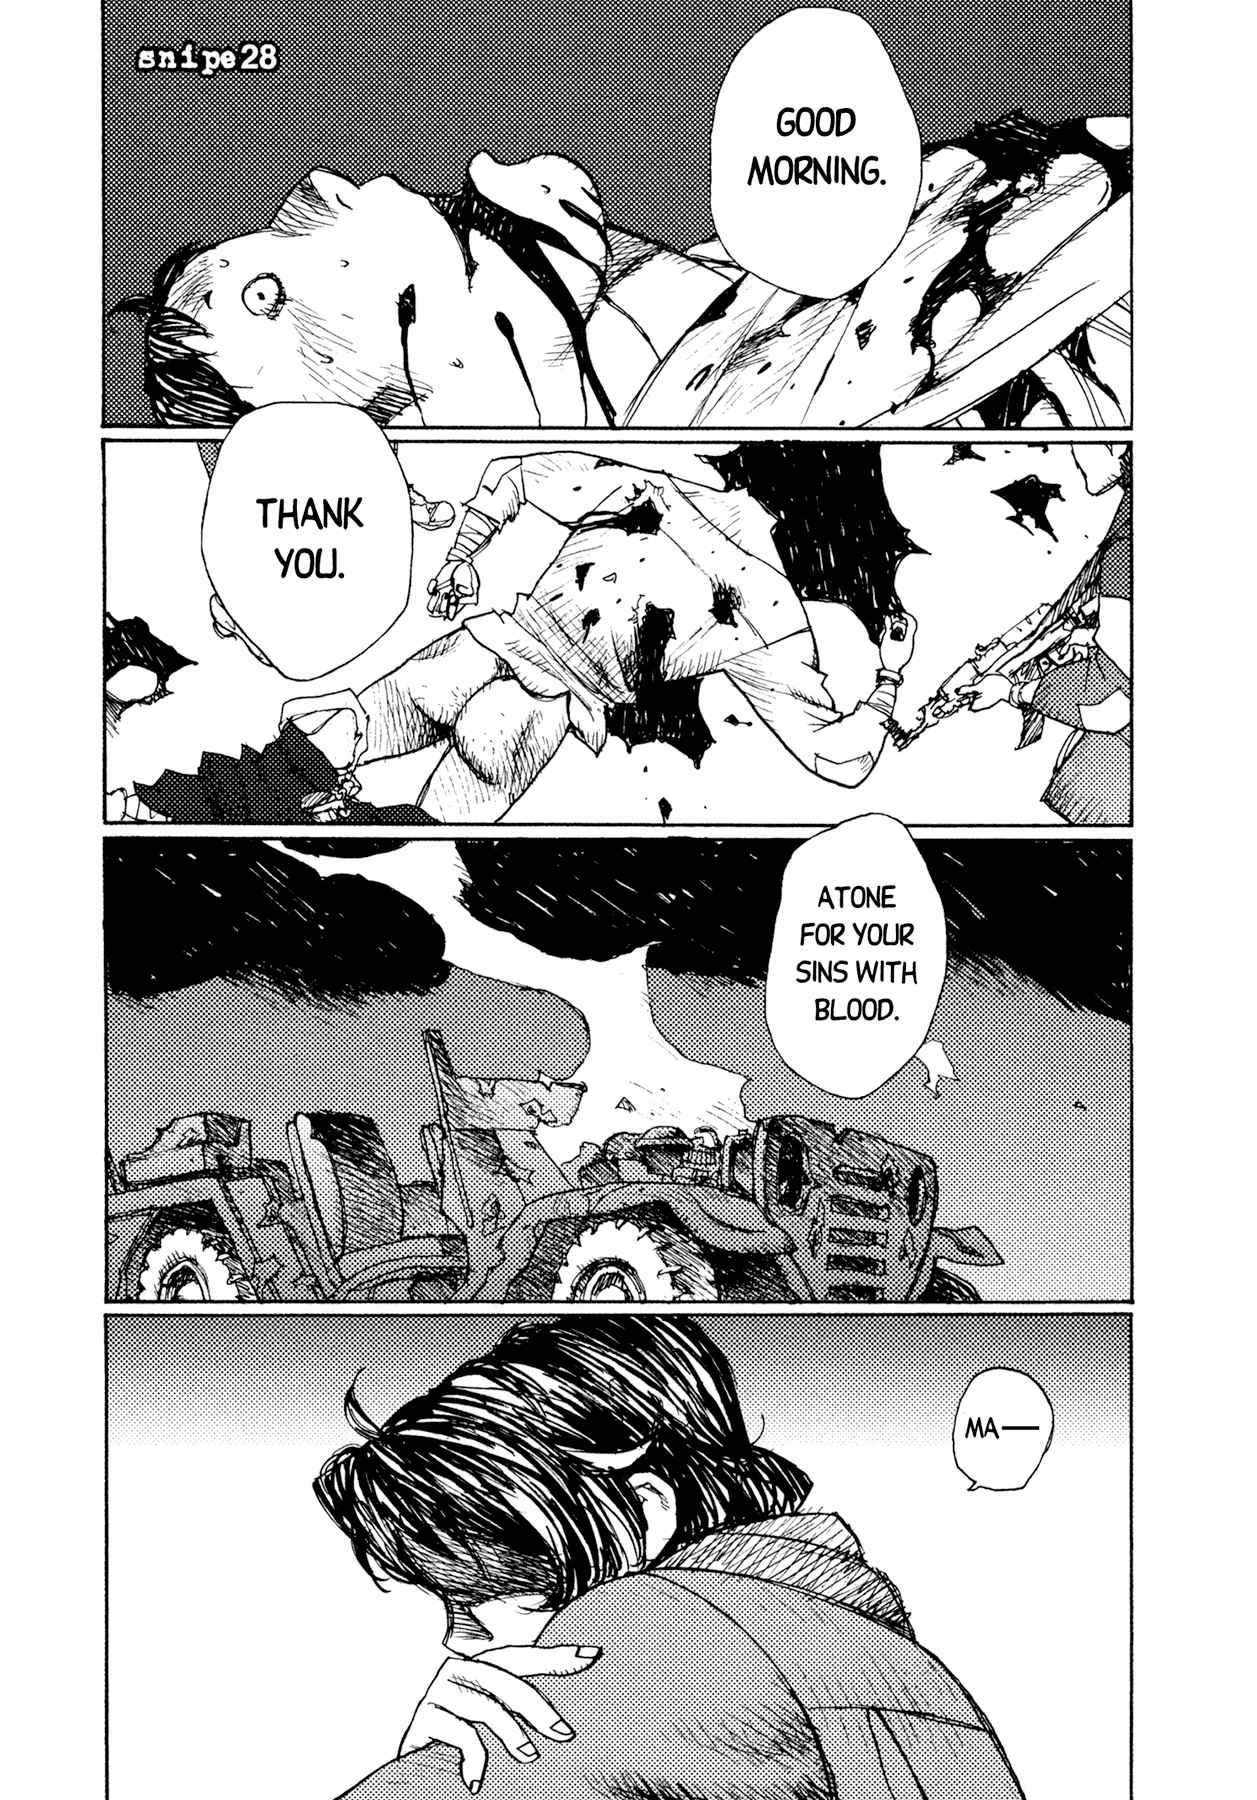 Alice in Hell Vol. 4 Ch. 28 Welcome, Shuu